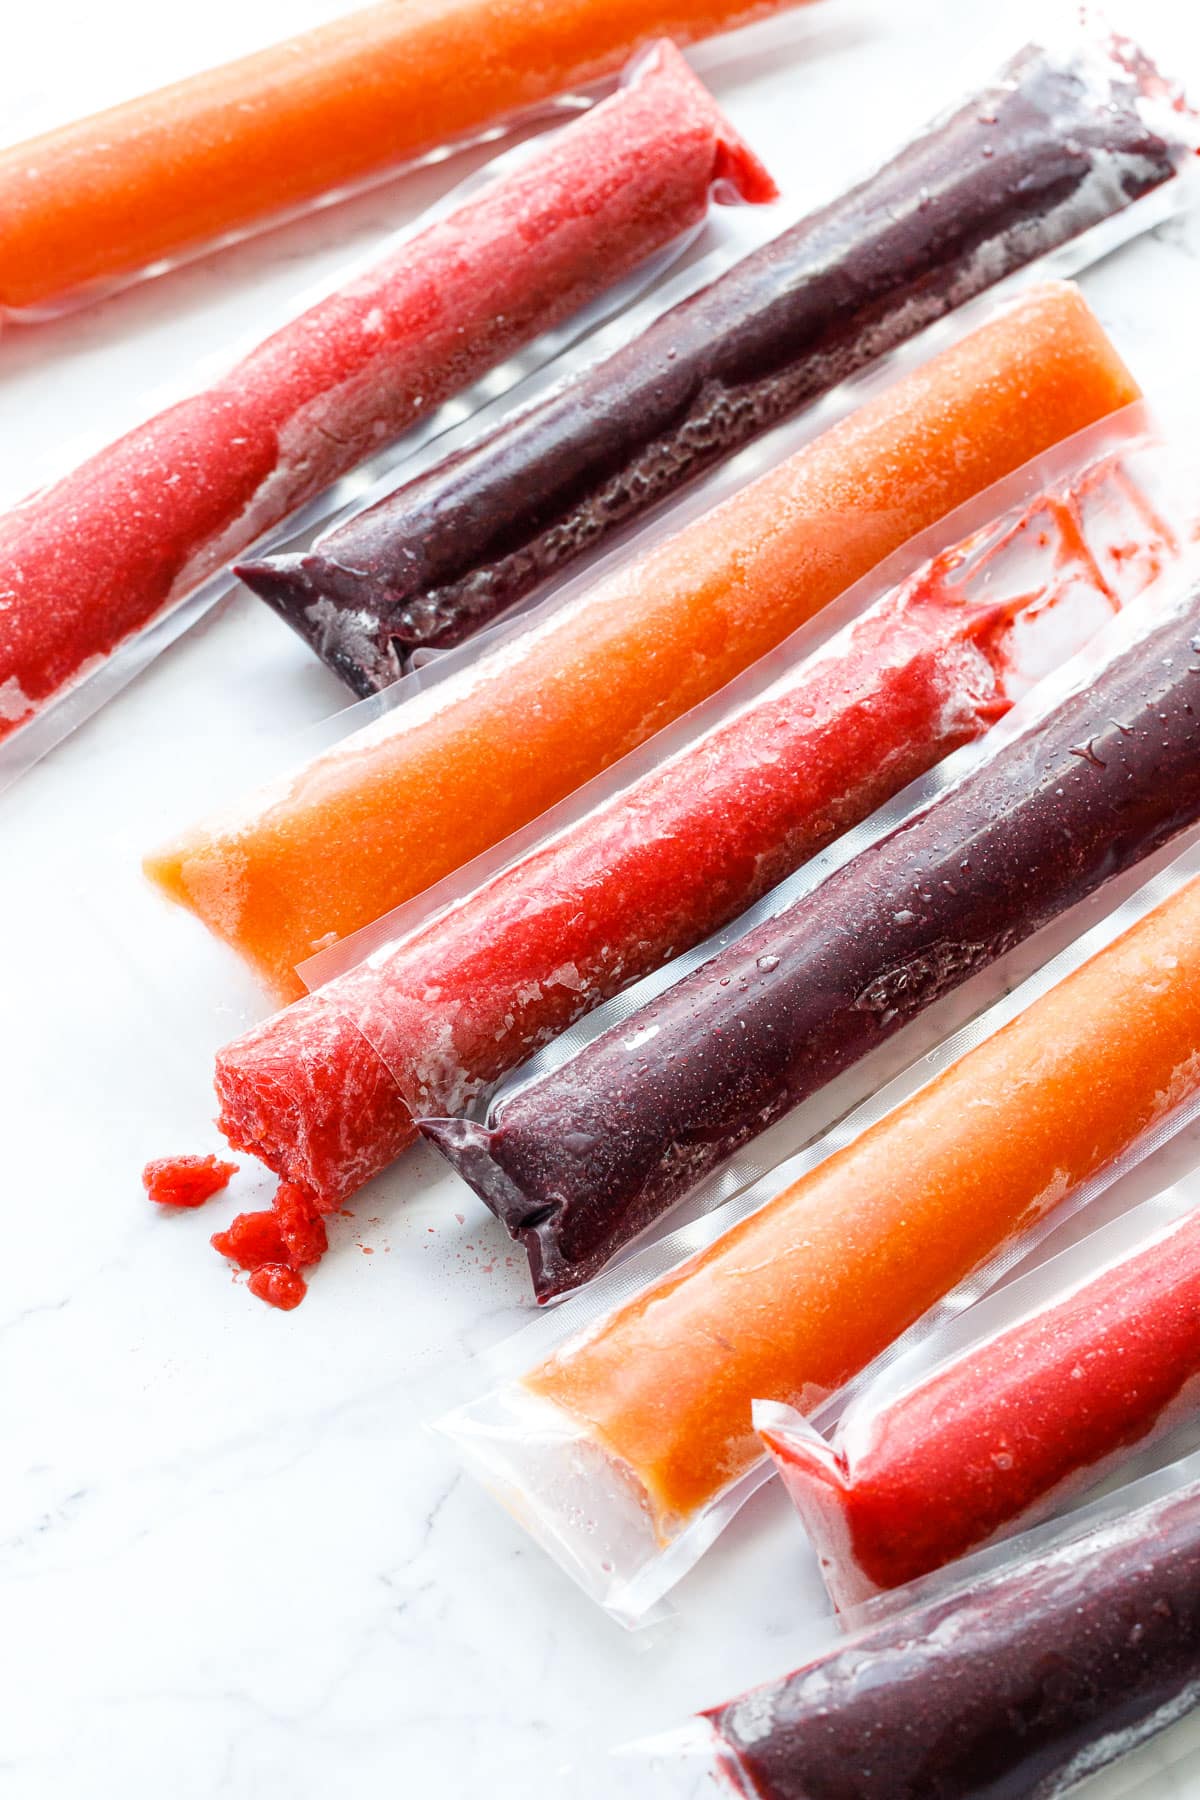 Rows of alternating colors/flavors of Freezer Jam Fruit Ice Pops, one strawberry popsicle cut and with a bite out of it to show the texture.